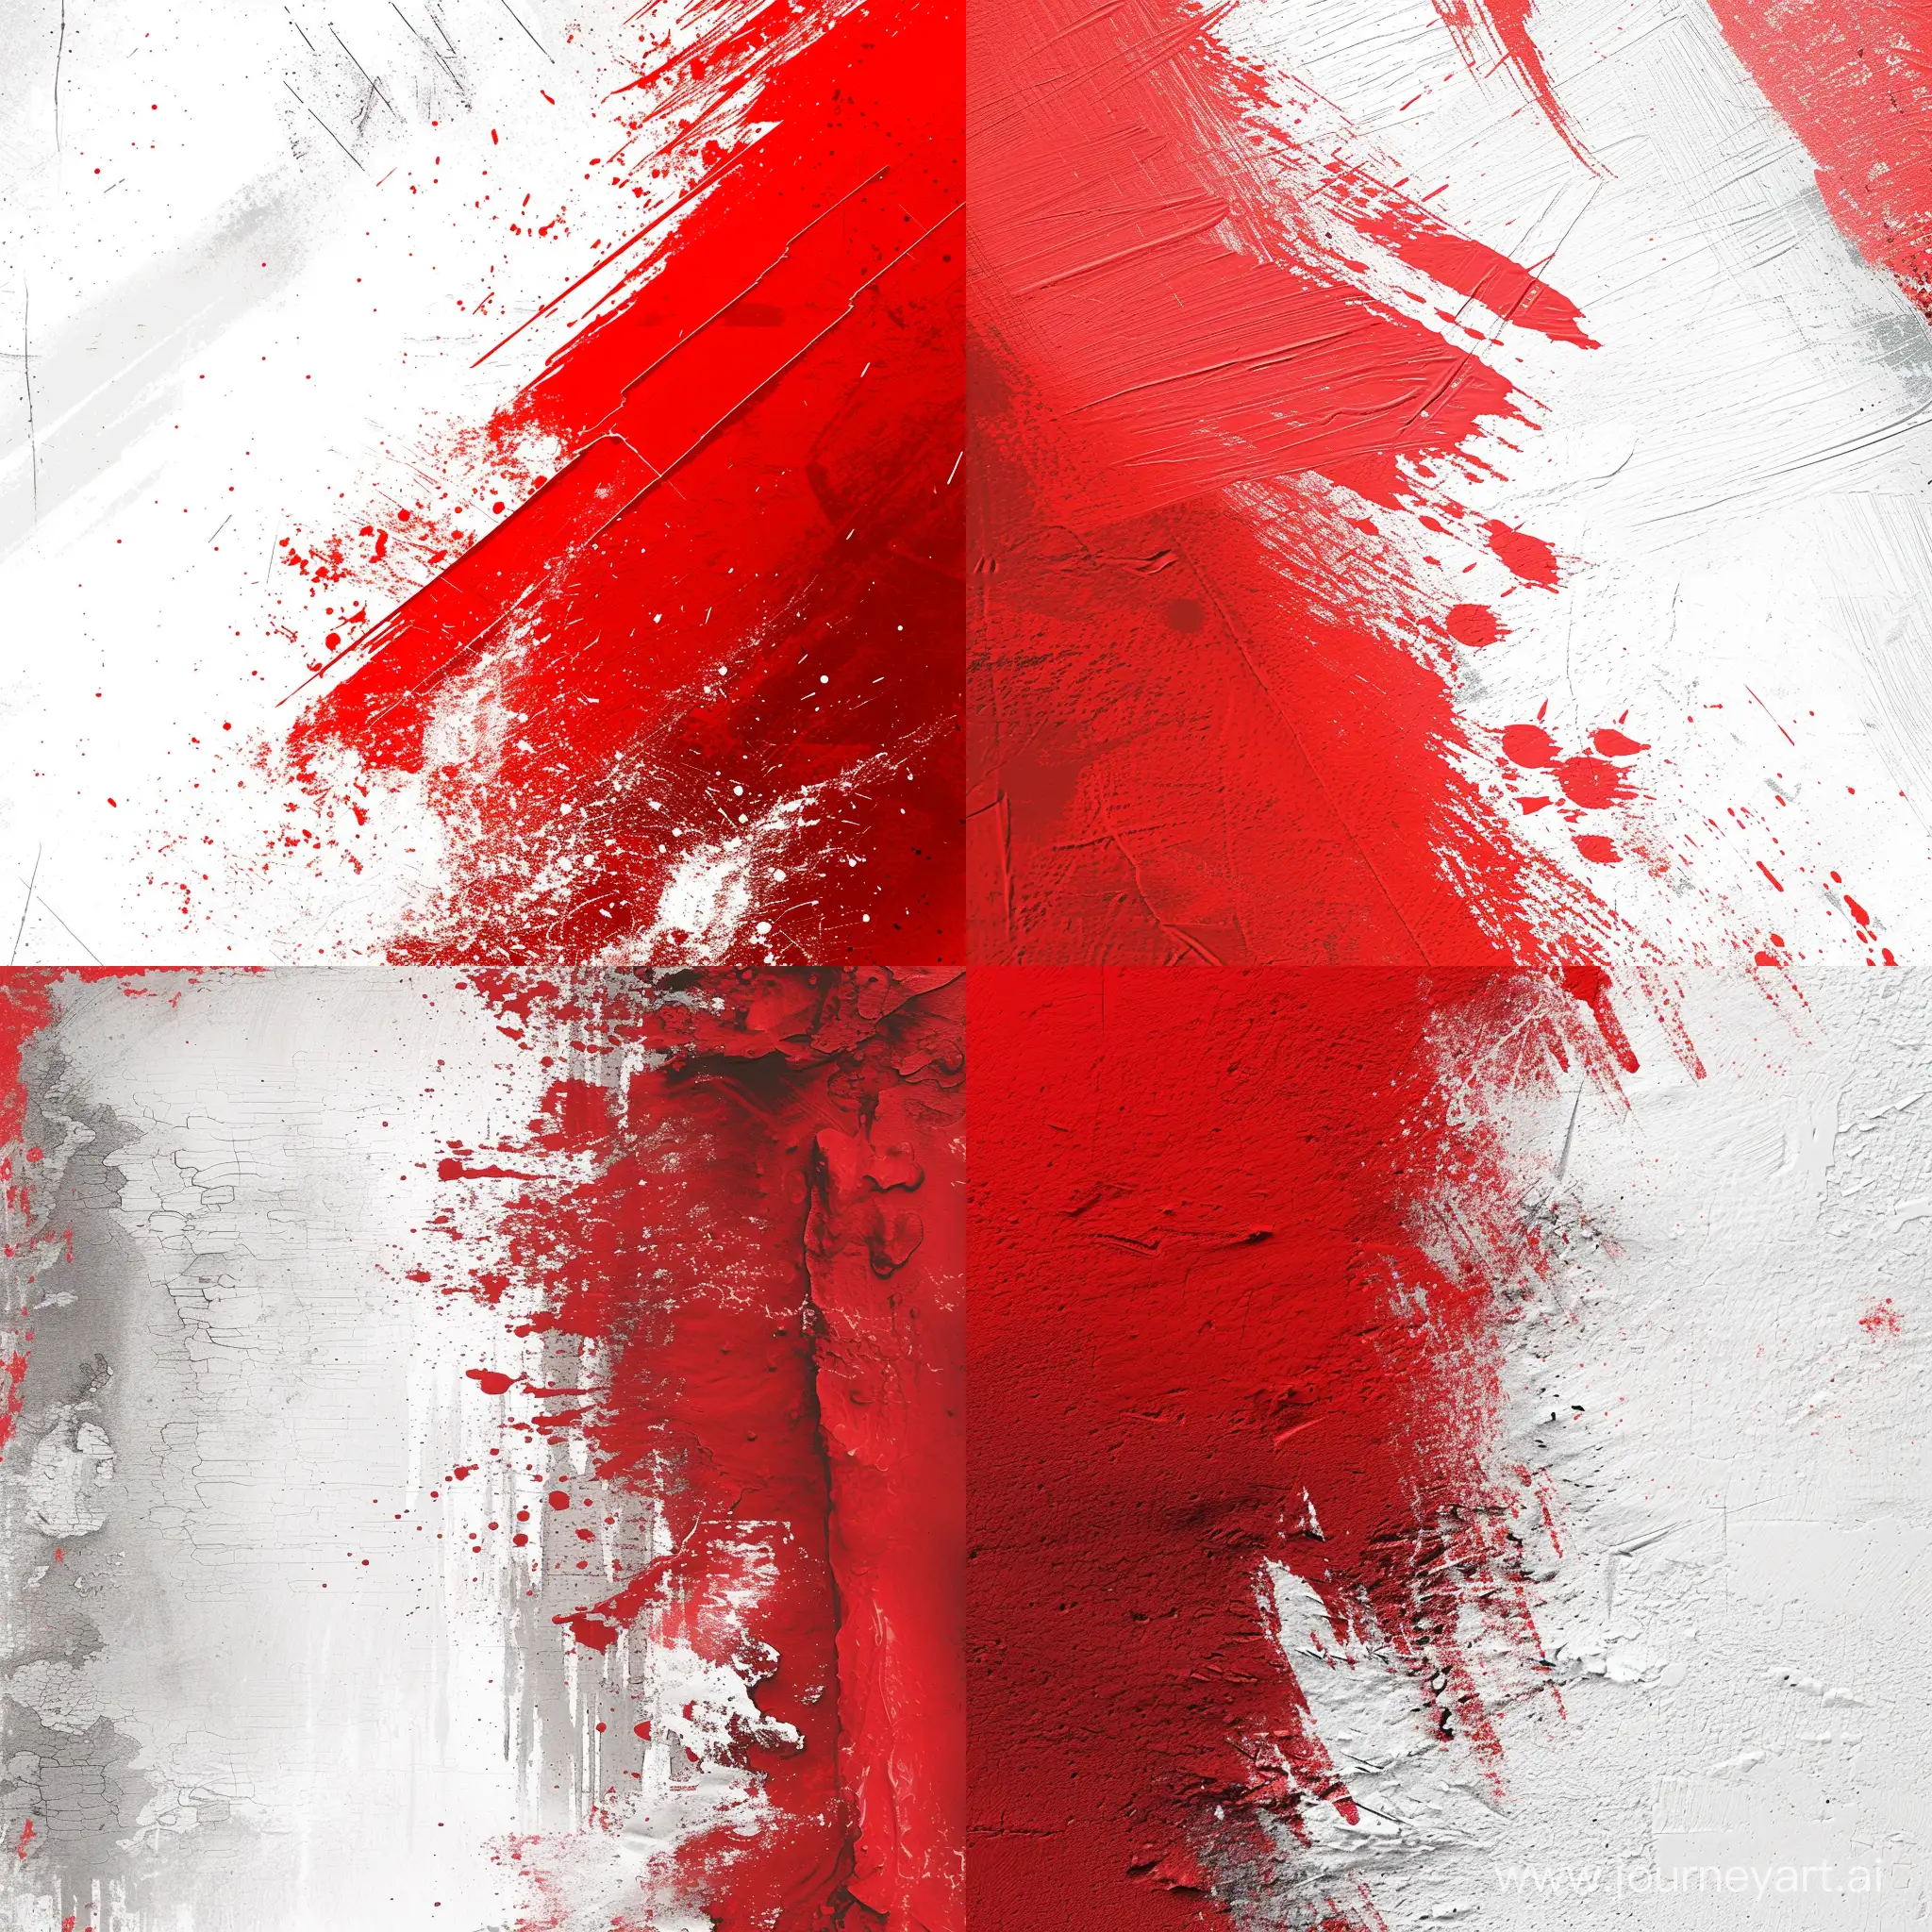 Vibrant-Textured-Red-and-White-Spray-Paint-Background-for-Flyer